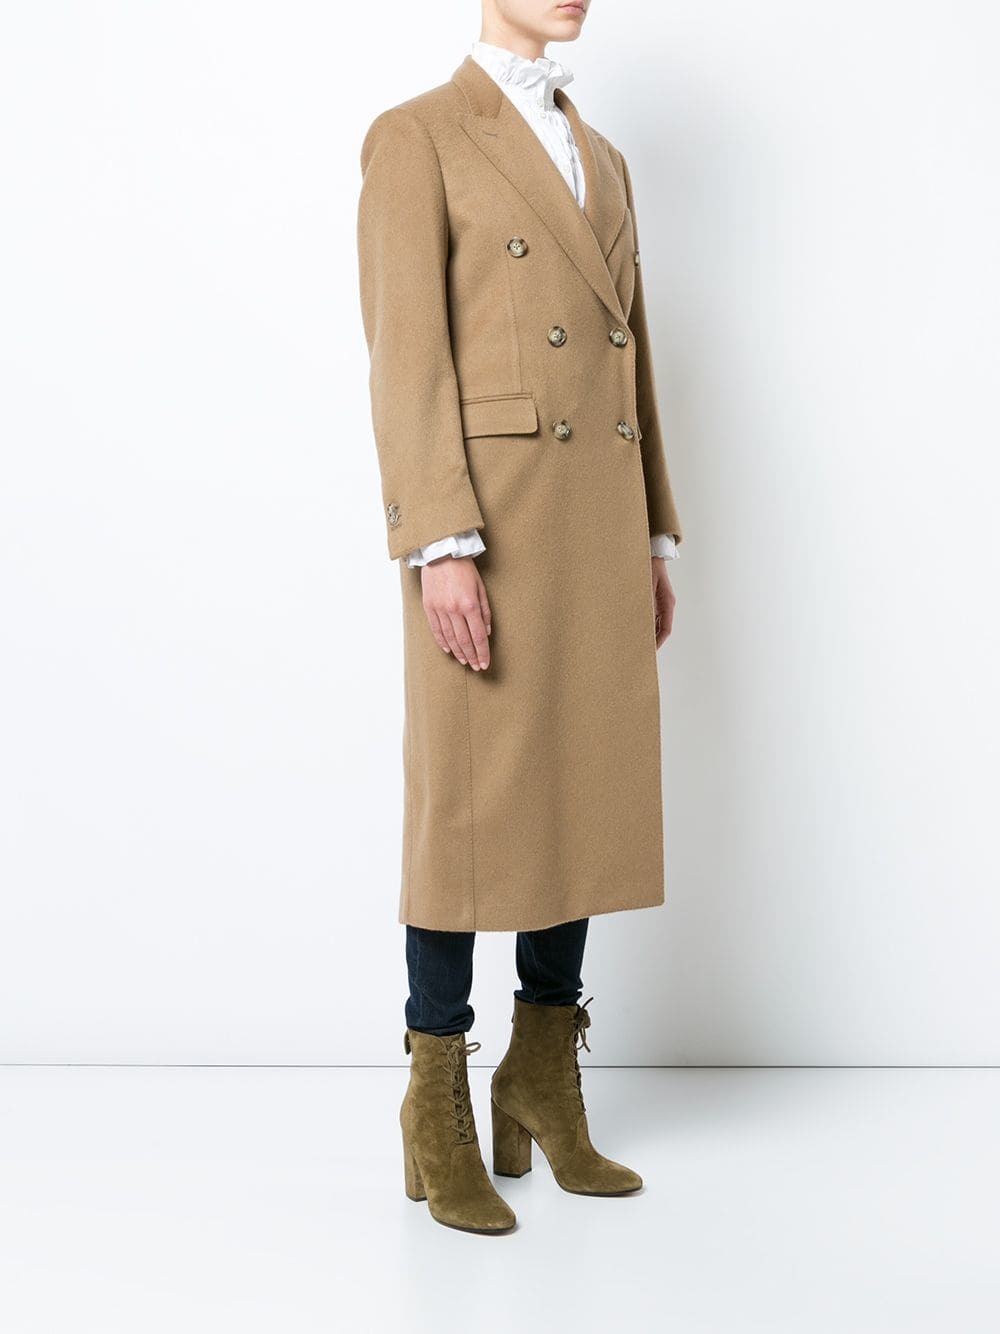 Giuliva Heritage Collection Double Breasted Coat, $1,922 | farfetch.com ...